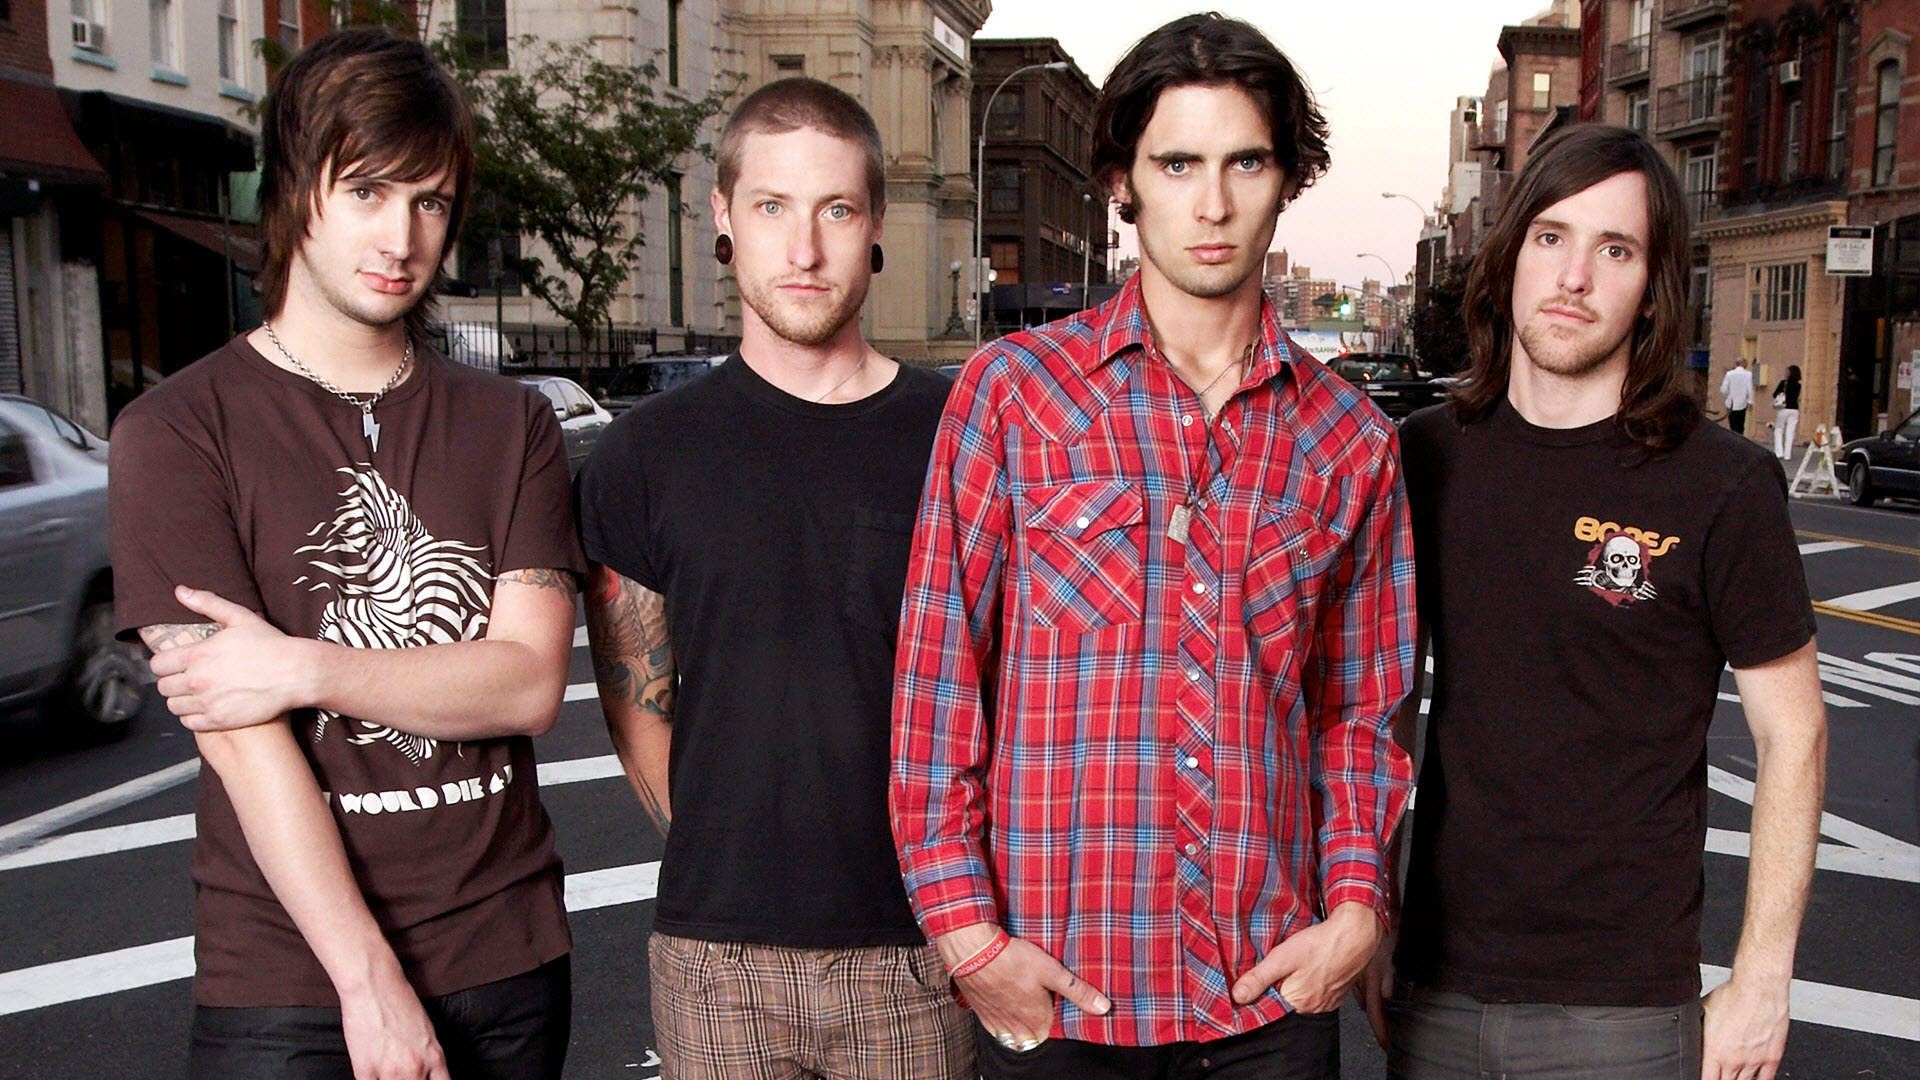 I Wanna av The All American Rejects